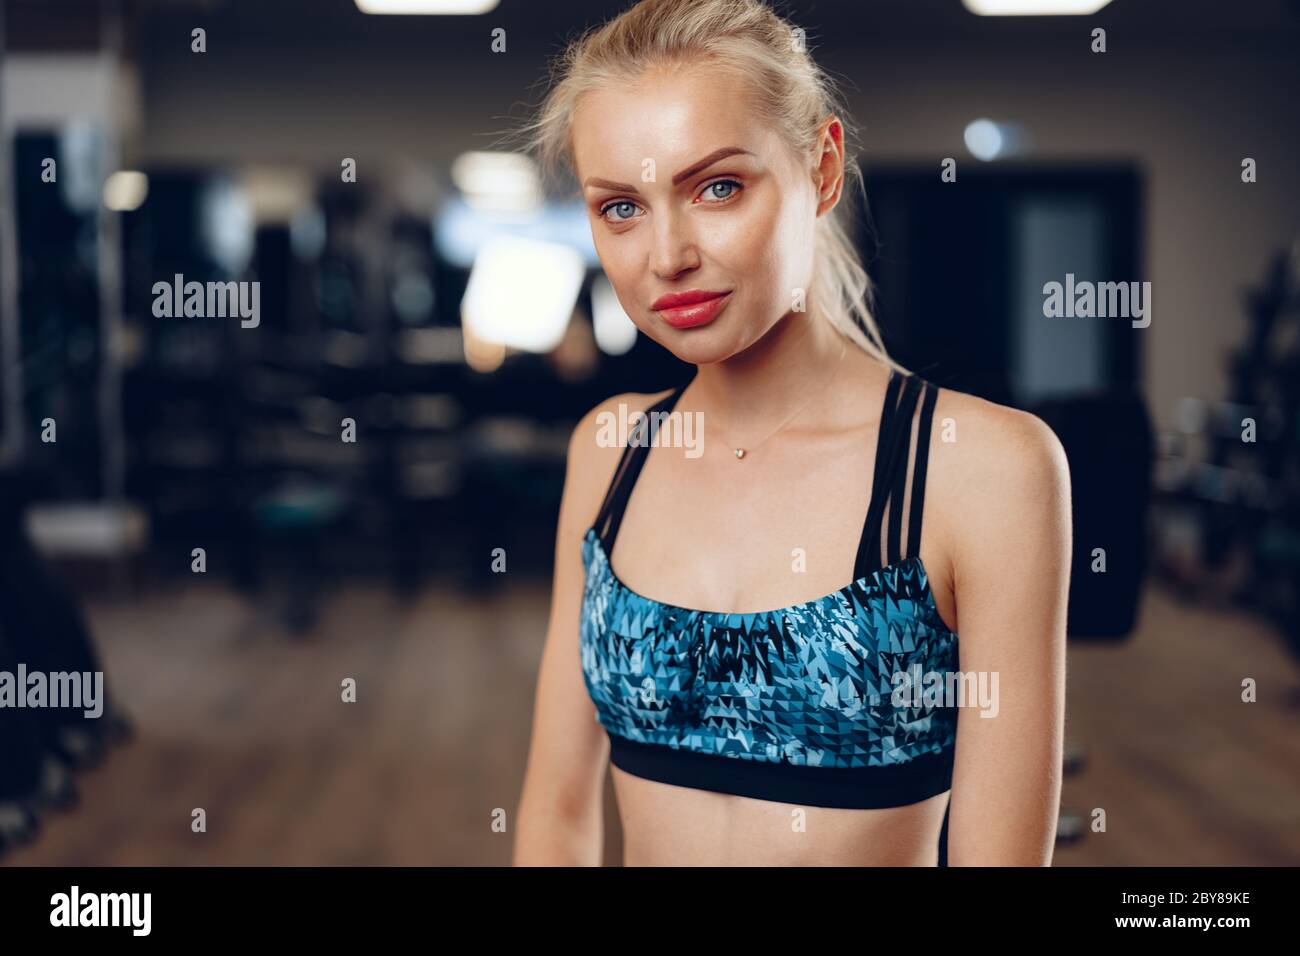 3,975 Blond Gym Outfit Woman Royalty-Free Images, Stock Photos